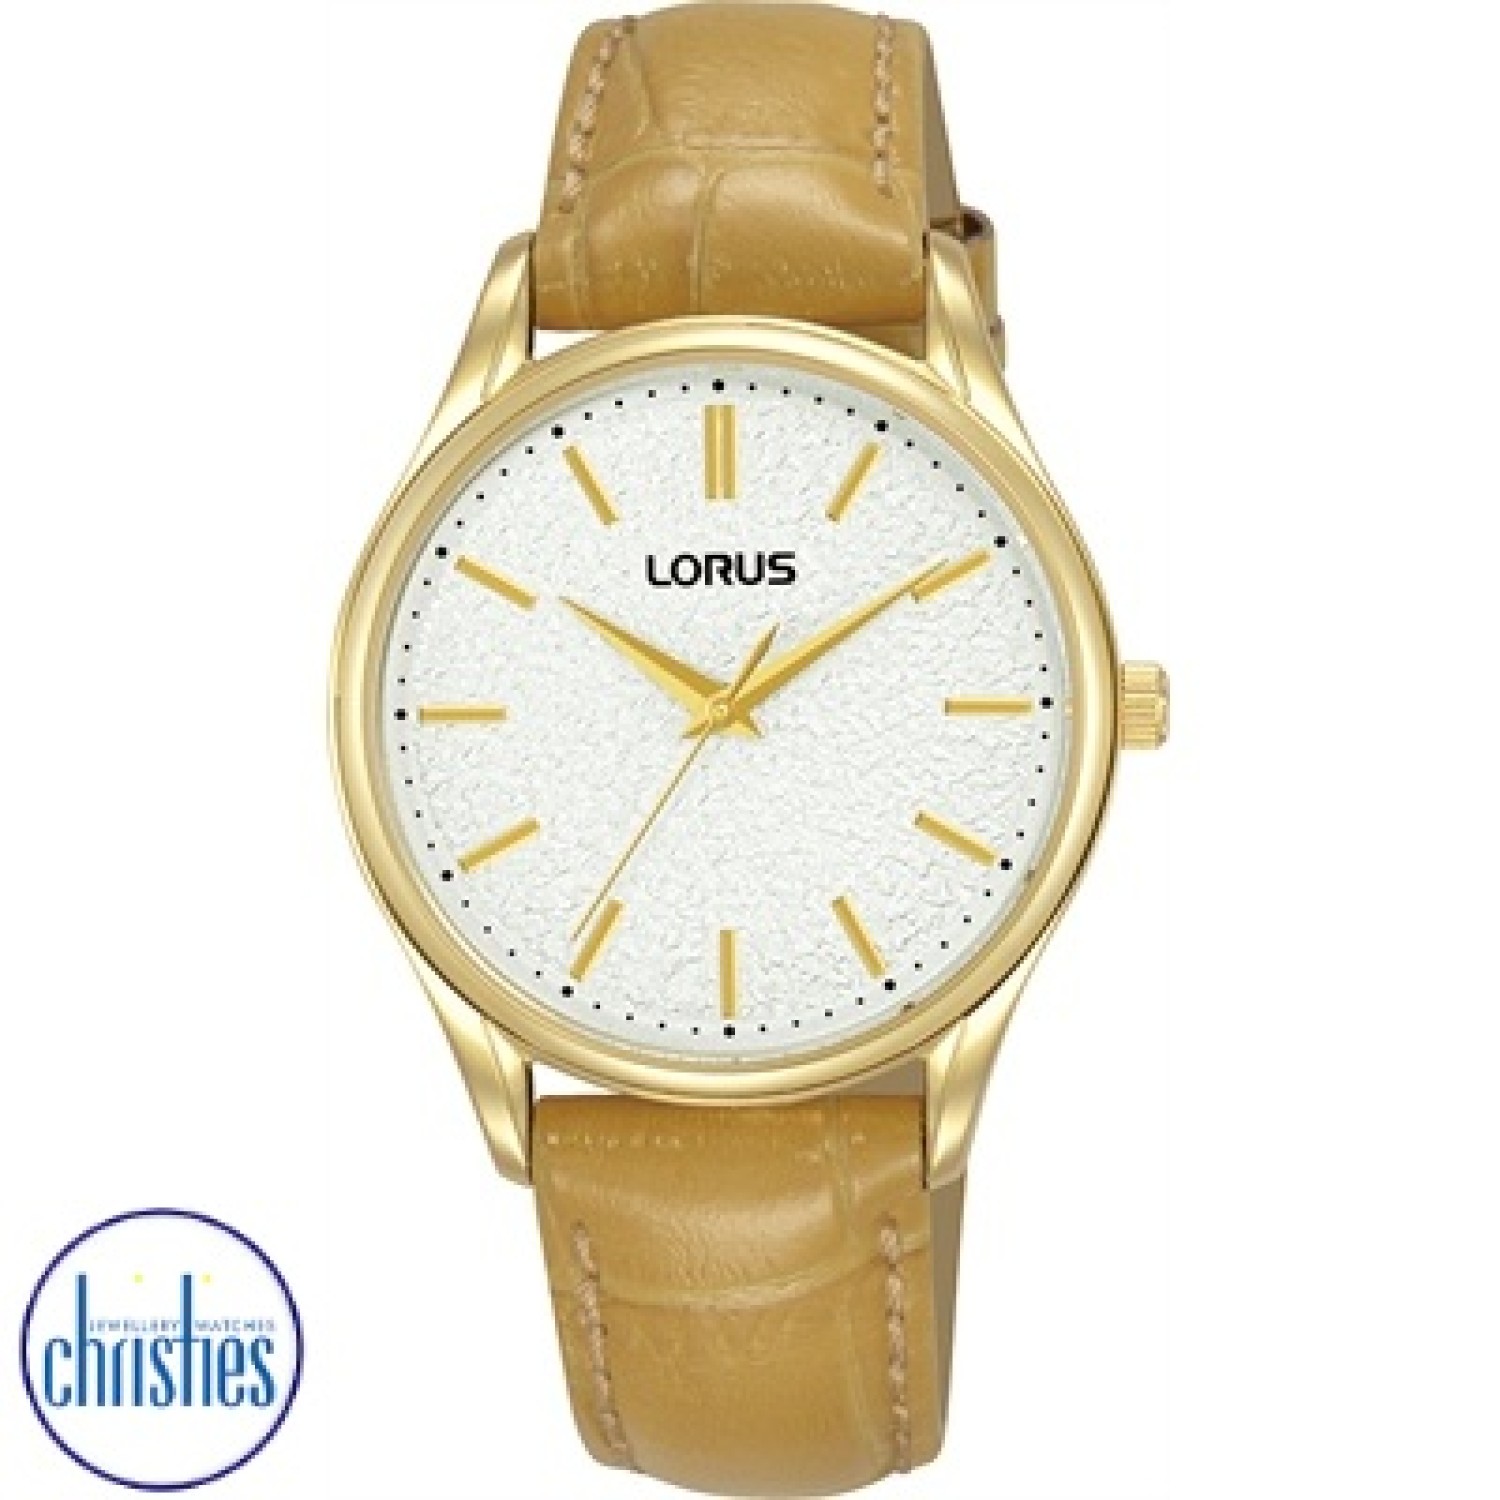 RG222WX9 Lorus Ladies Dress Analogue Watch RG220WX-9 Lorus by Seiko Auckland s offers a diverse range of watch styles, including analog, digital, sports, and dress watches